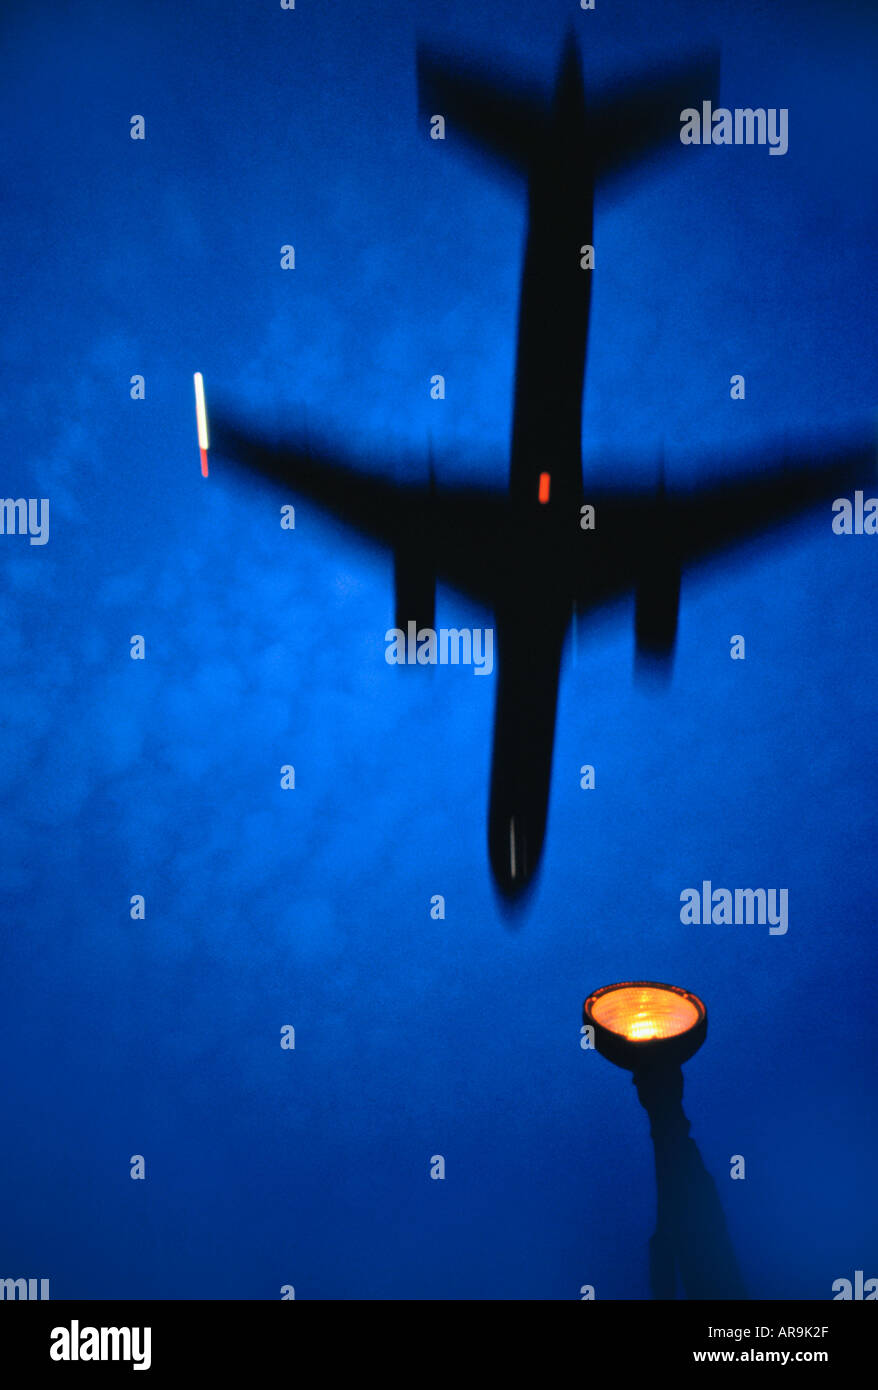 Boeing 757 jet airliner taking off flying over landing lights at dusk with a deep blue sky silhouette blurred movement Stock Photo